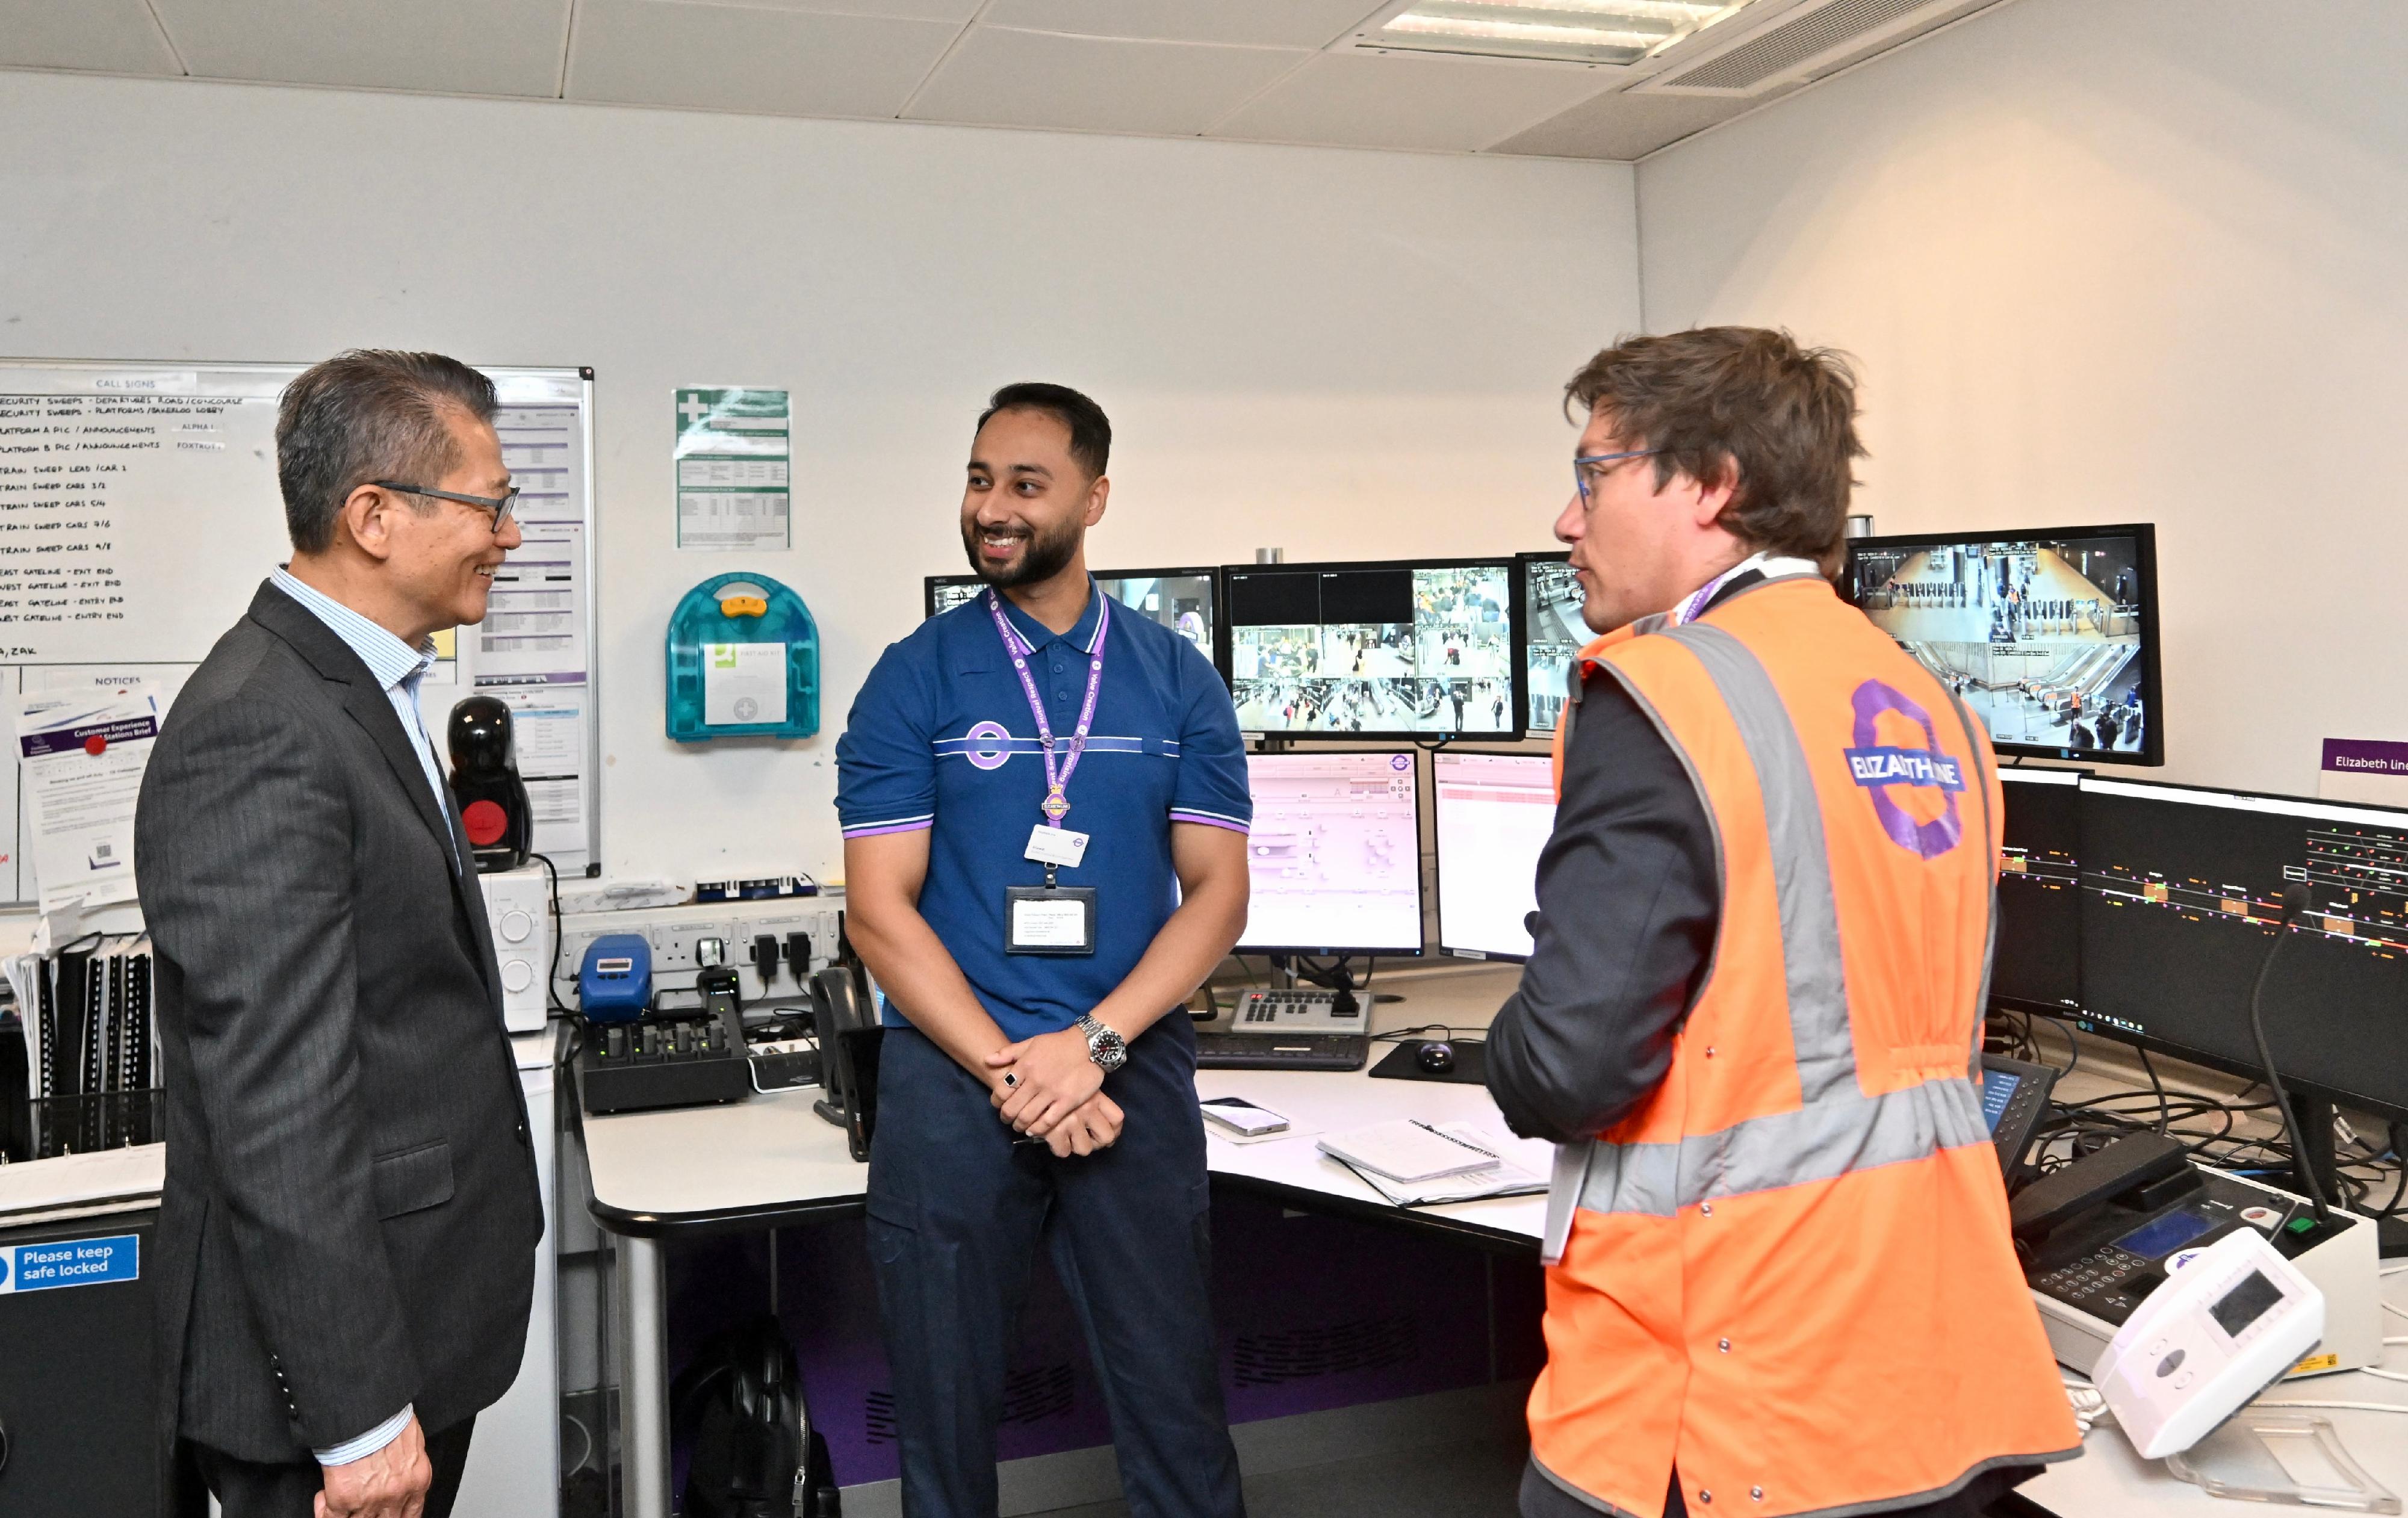 The Financial Secretary, Mr Paul Chan, continued his visit to London yesterday (September 23, London time). He visited Paddington Station in London to understand the operation of London's Elizabeth line, which is run by MTR Elizabeth line, a wholly-owned subsidiary of the MTR Corporation. Photo shows Mr Chan (first left) talking to station control staff of Paddington Station.